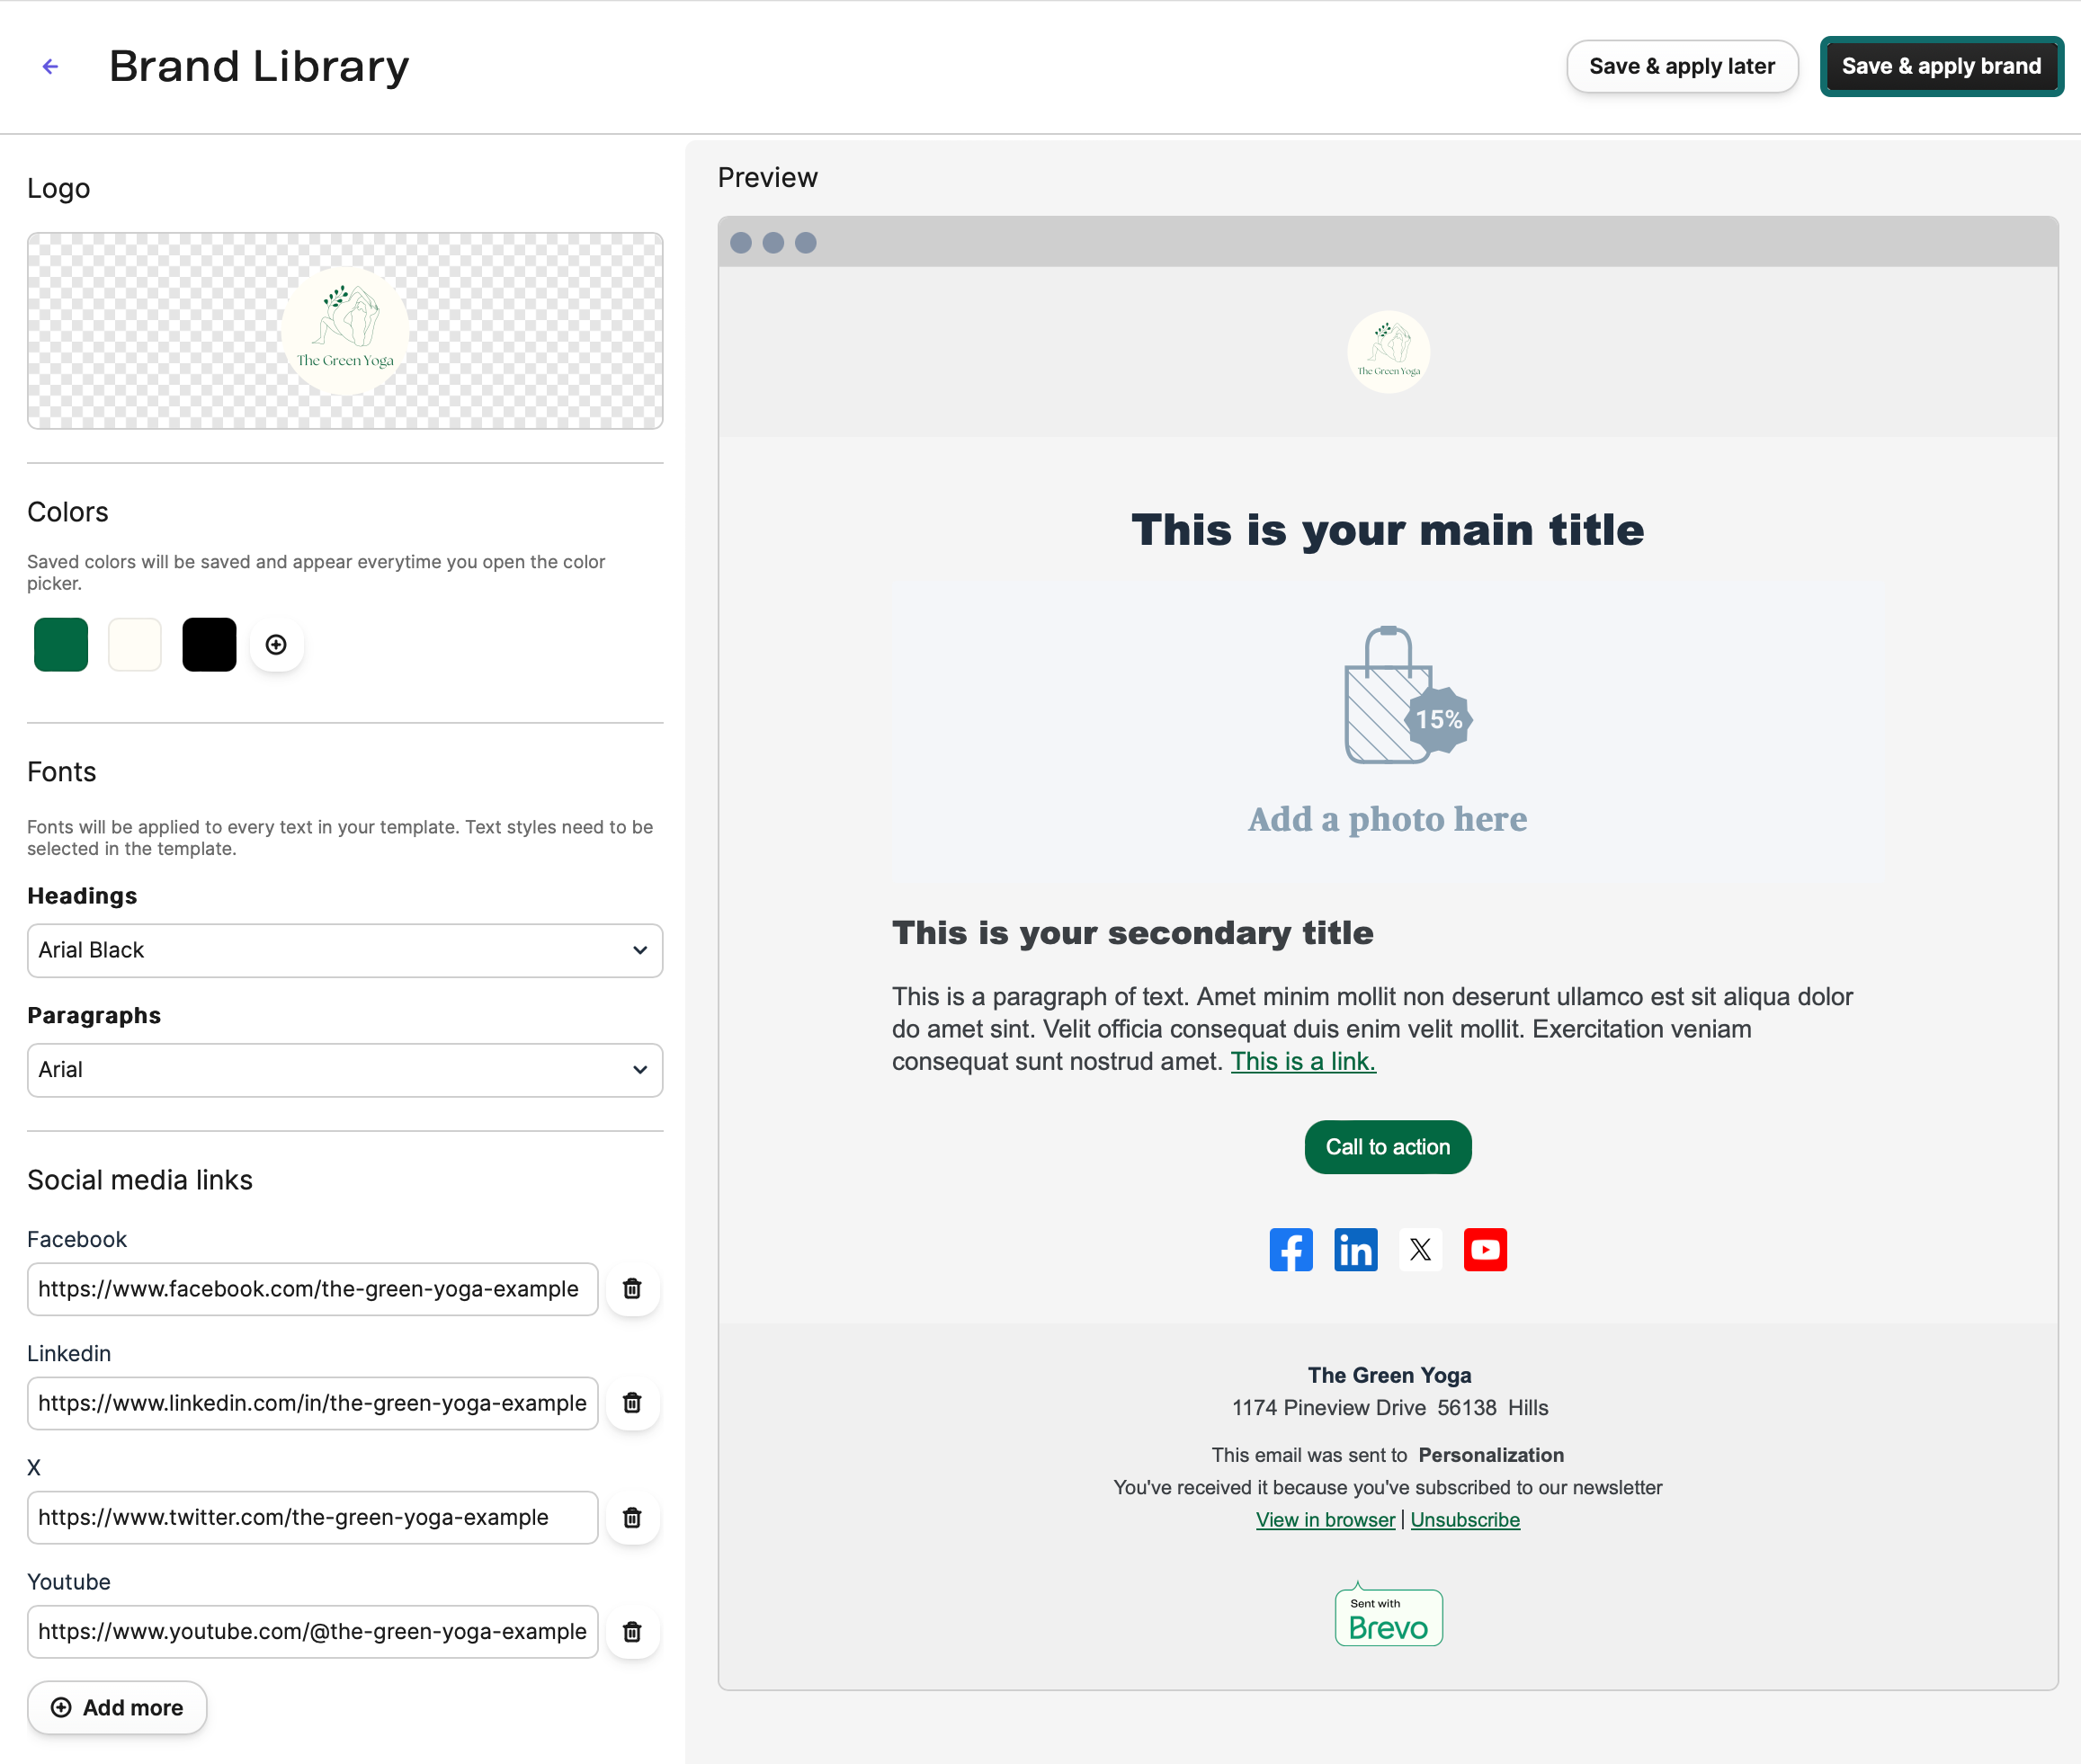 DDE_brand-library_FR.png